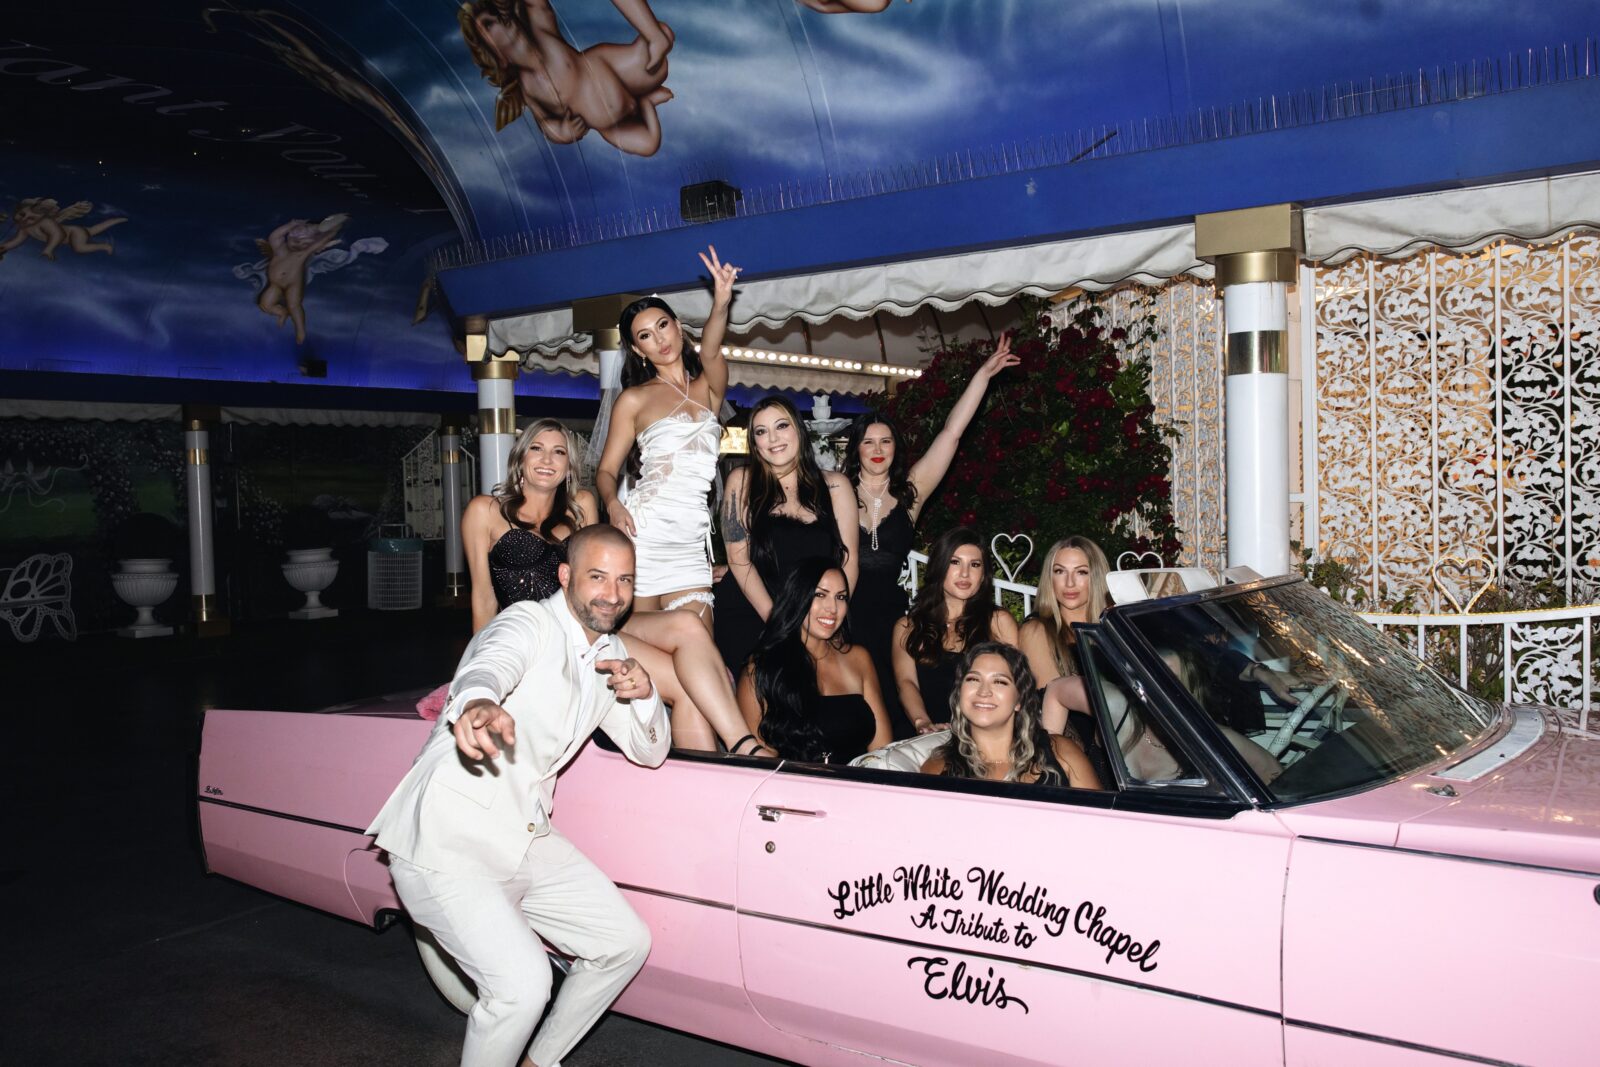 Bride, groom and their wedding party posing for photos in the Pink Cadillac at Little White Wedding Chapel in Las Vegas